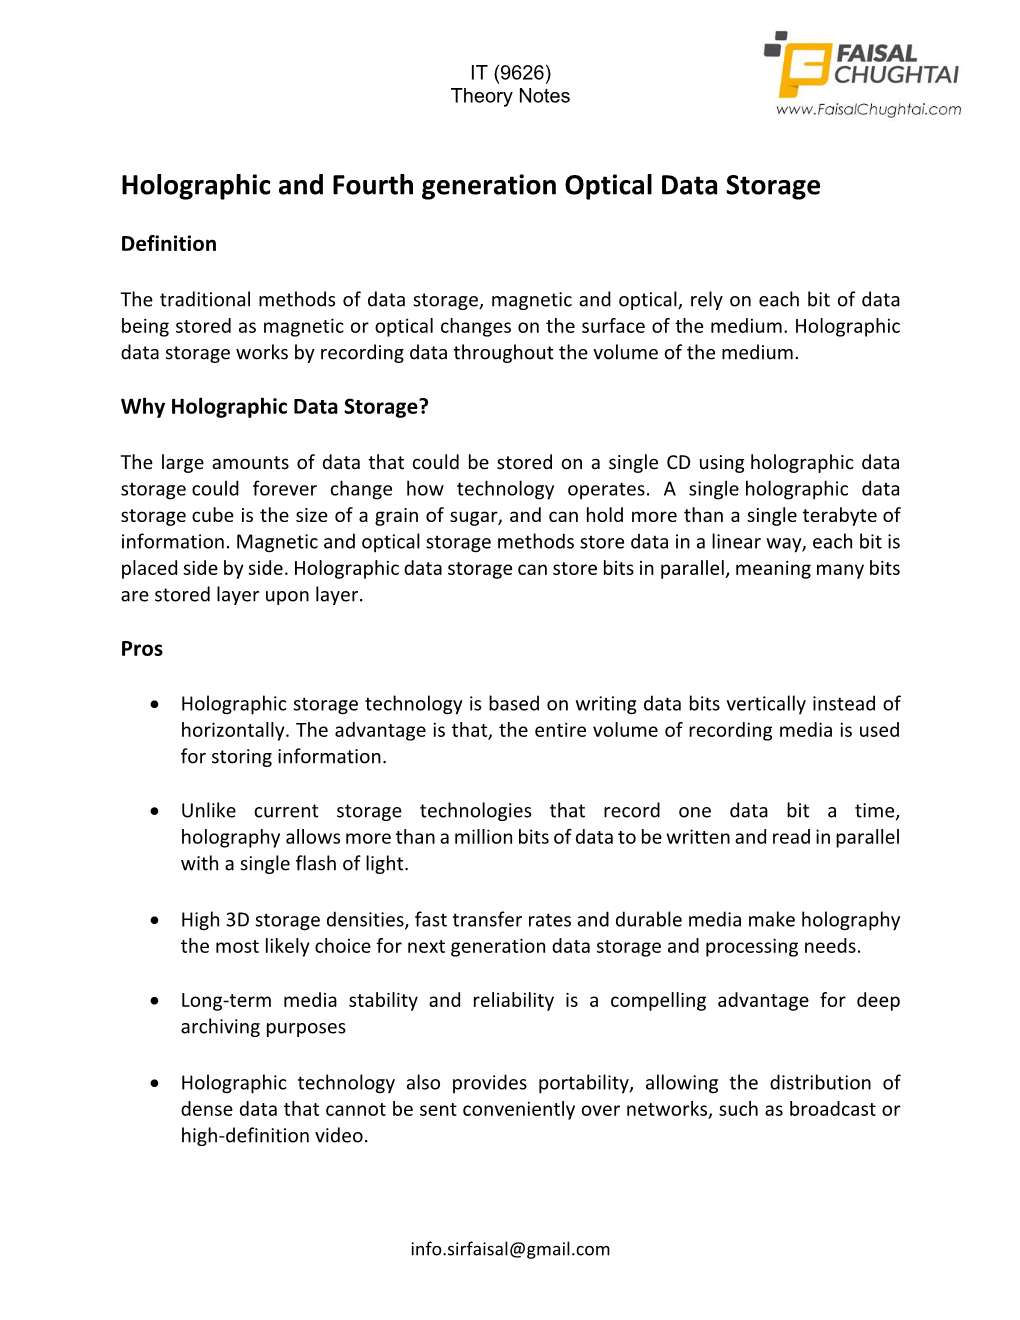 Holographic and Fourth Generation Optical Data Storage